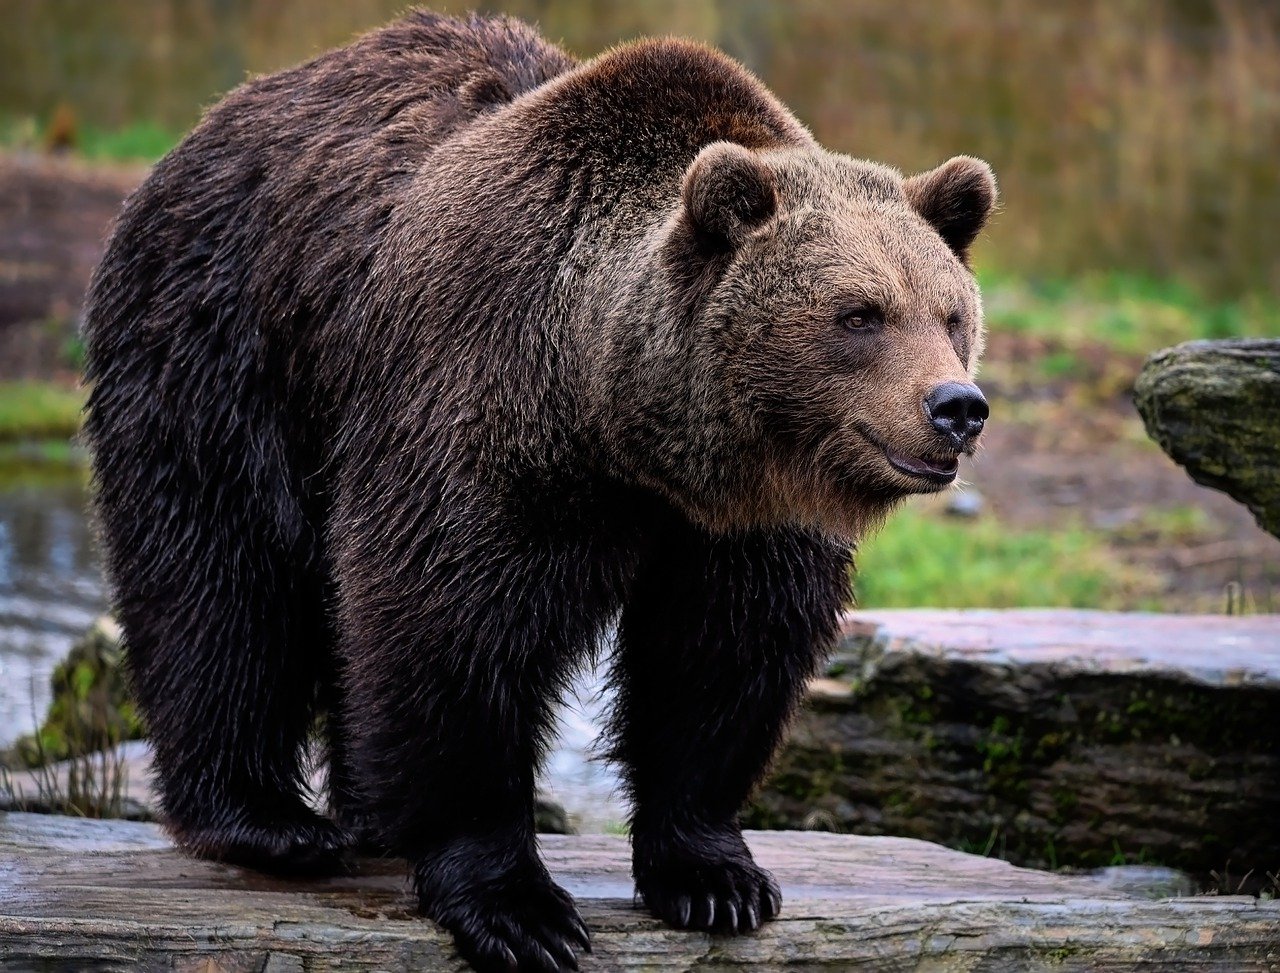 two people killed by a grizzly bear